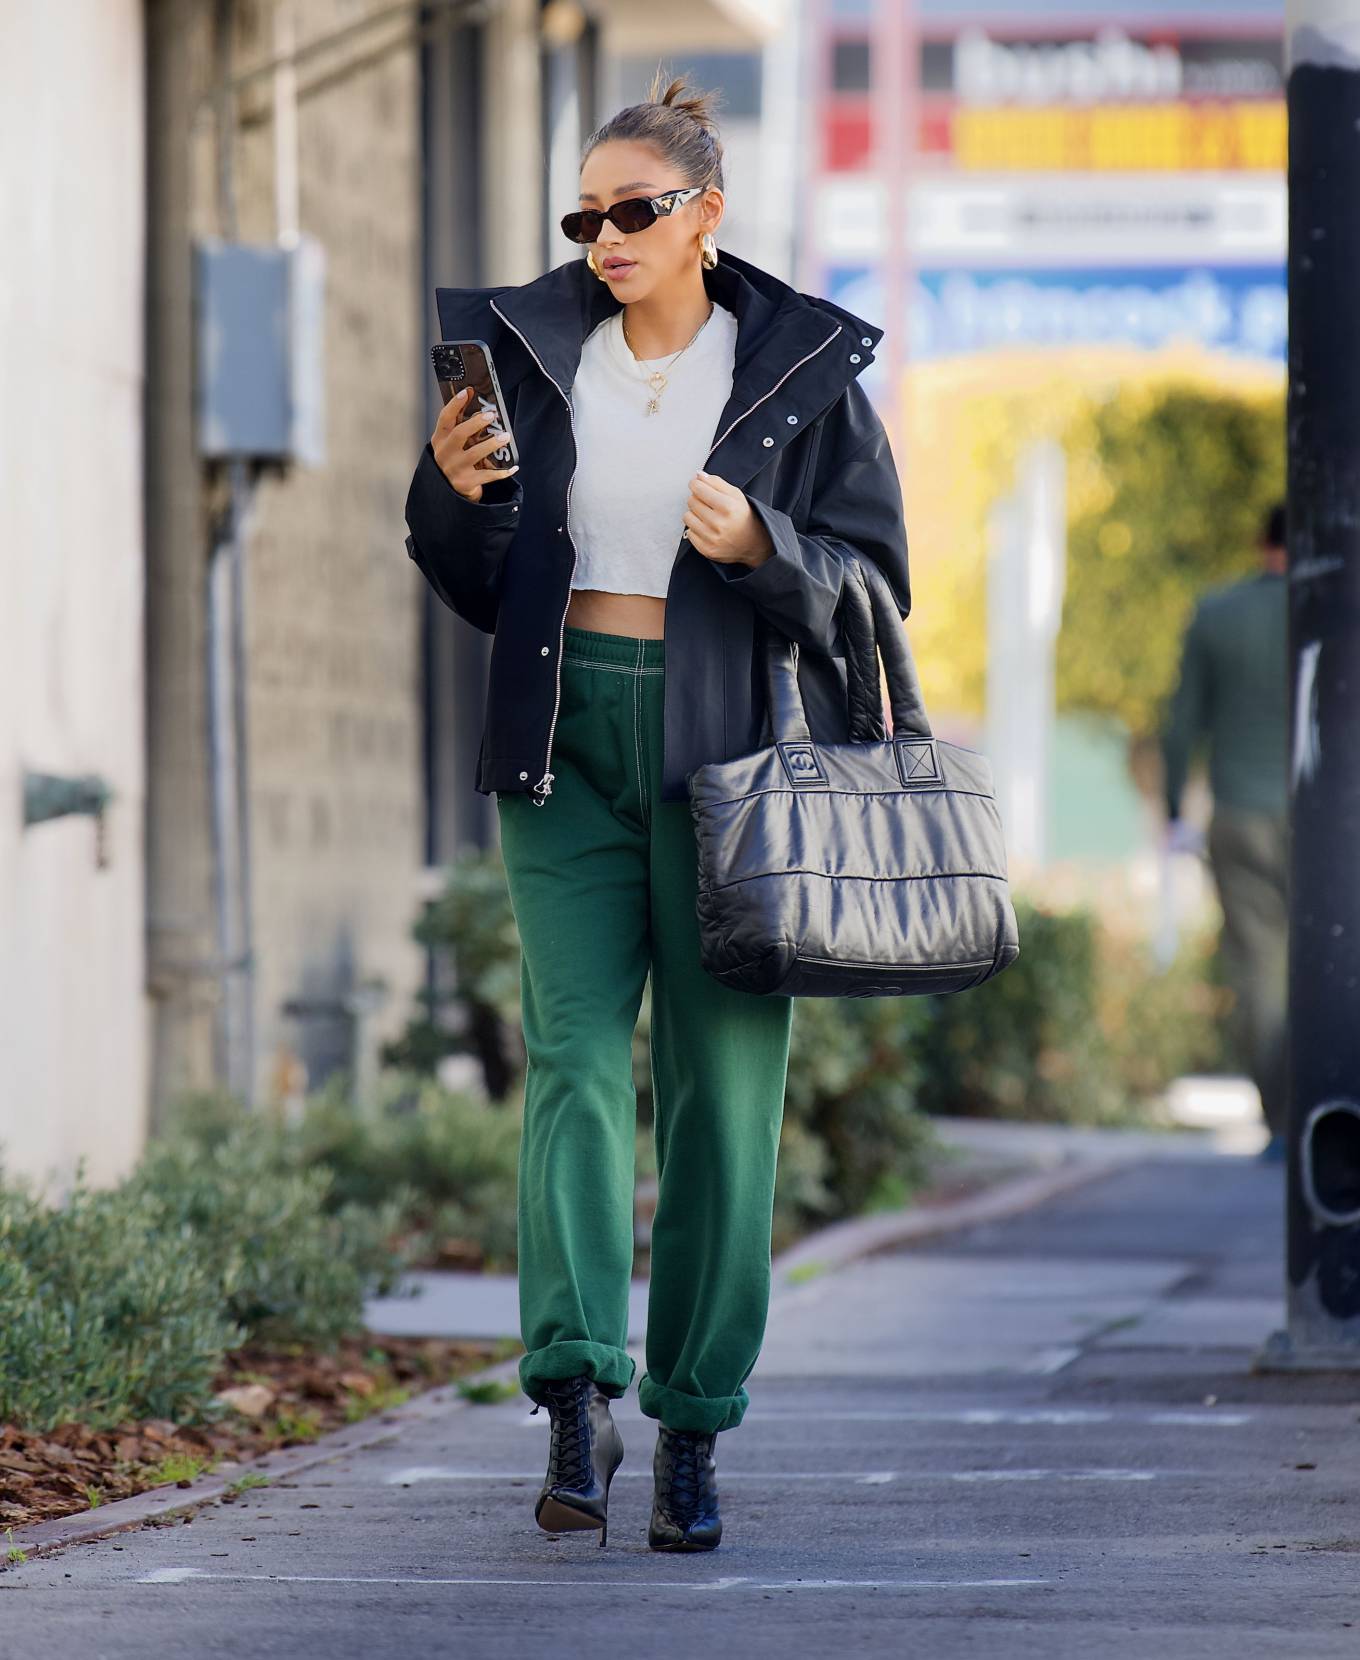 Shay Mitchell 2022 : Shay Mitchell – Wearing Sarah Jessica Parker style rolled up sweatpants with heeled boots in LA-02